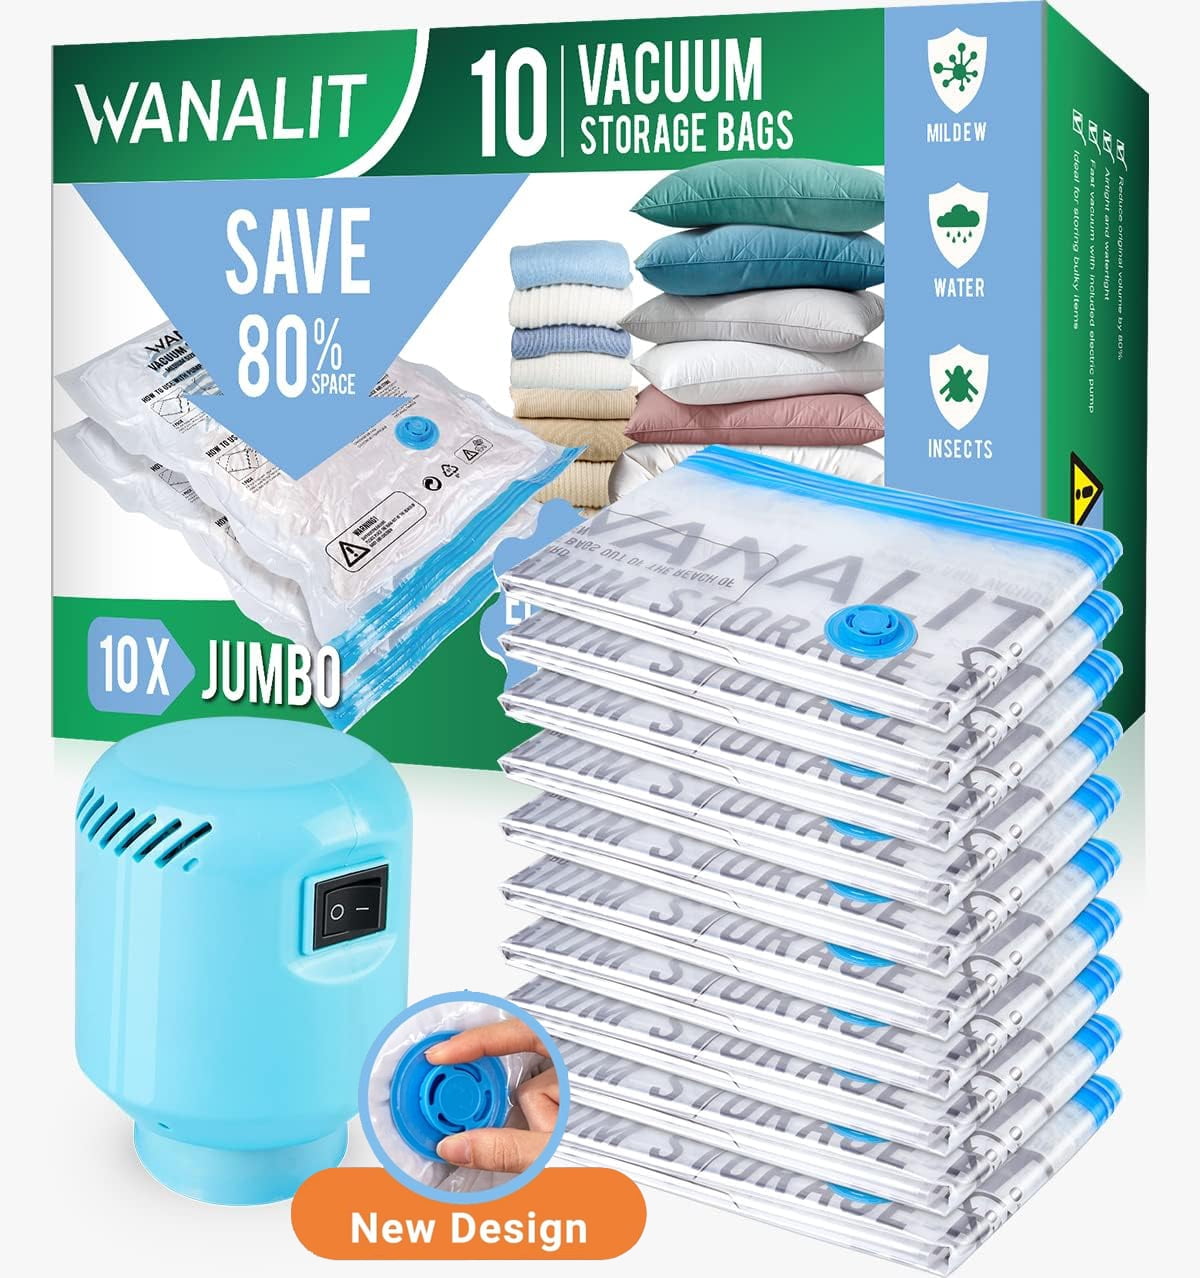 WANALIT Vacuum Storage Bags,15 Combo Space Saver Vacuum Storage Bags(3 Jumbo/3  Large/3 Medium/3 Small/3 Roll up), Airtight Vacuum Sealed Bags with  Electric Pump for Clothes Blankets and Comforters 